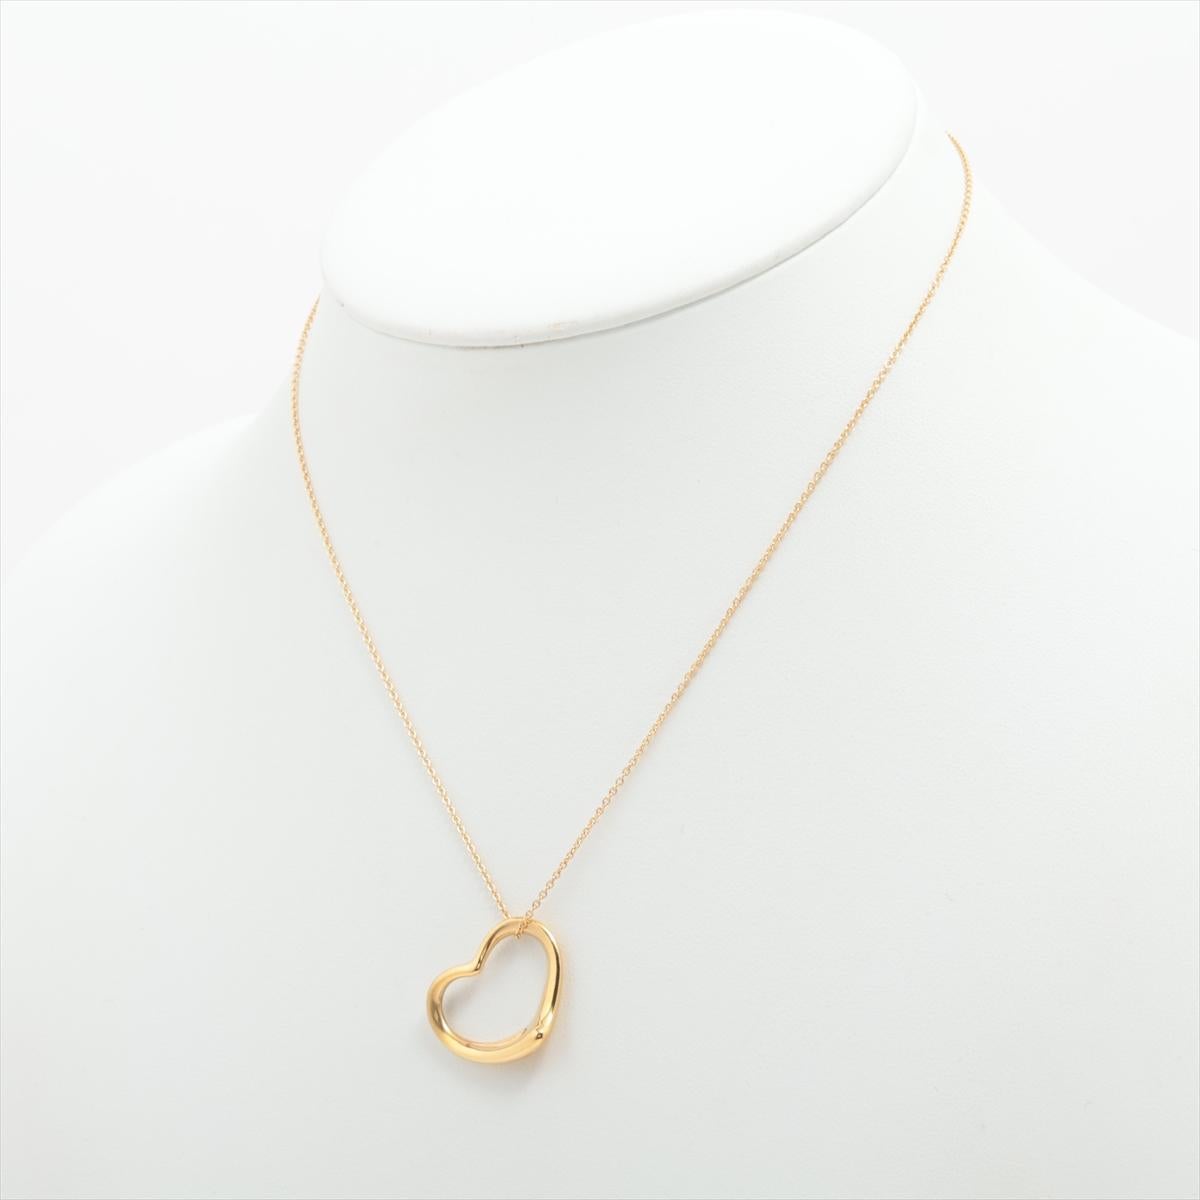 The Tiffany & Co. Open Heart Pendant Necklace in Gold is a stunning jewelry piece that embodies elegance and sophistication. The necklace features a delicate open heart-shaped pendant suspended from a dainty gold chain. The pendant's design is